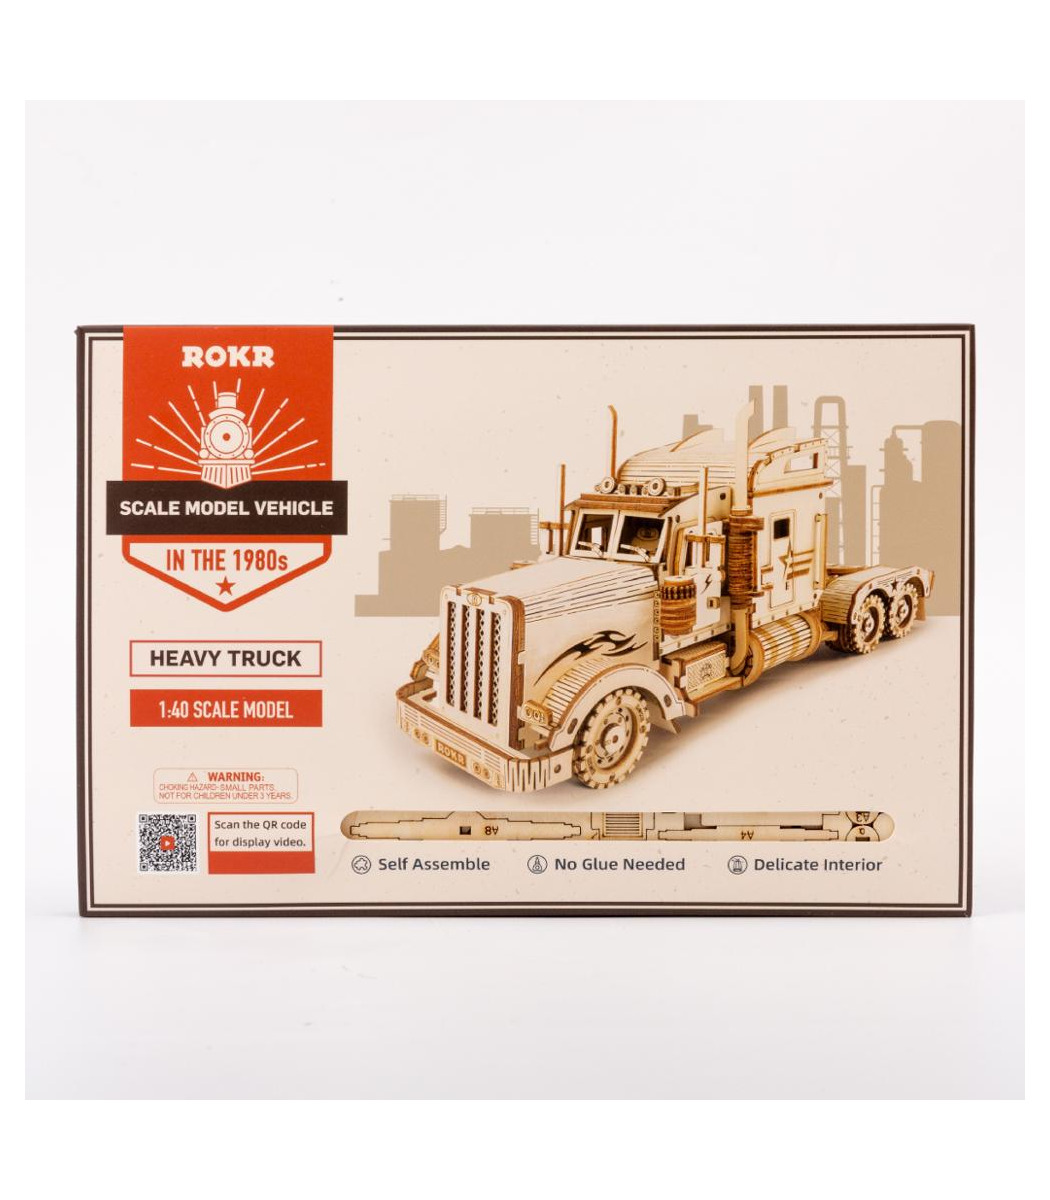 ROKR wooden toys and puzzles for technology enthusiasts